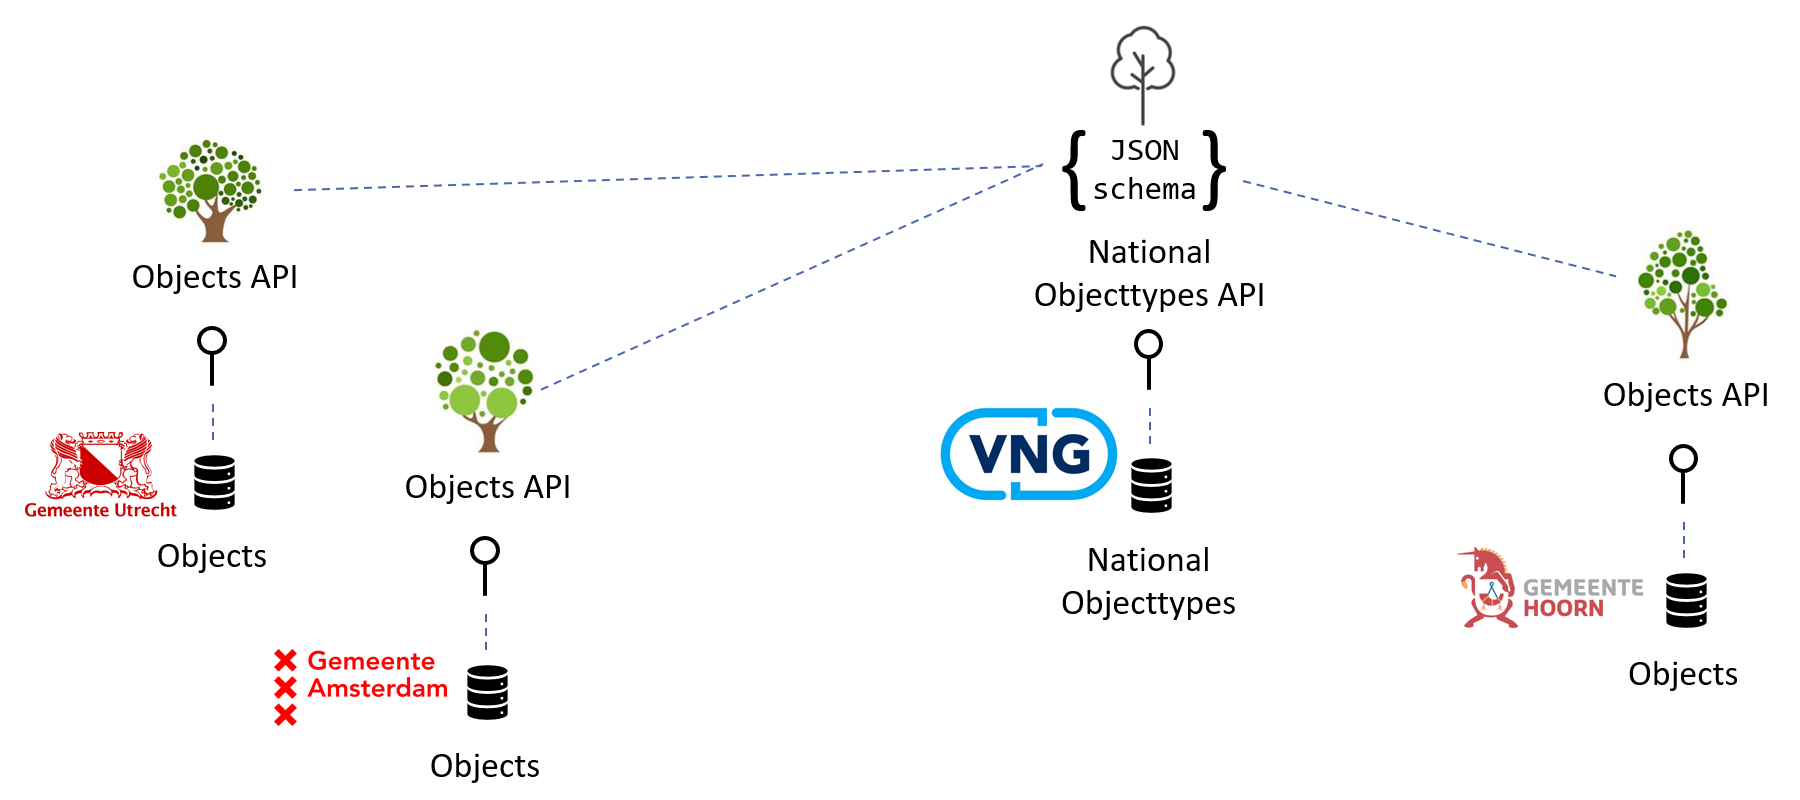 multiple_objects_apis_using_national_objecttypes_api.png